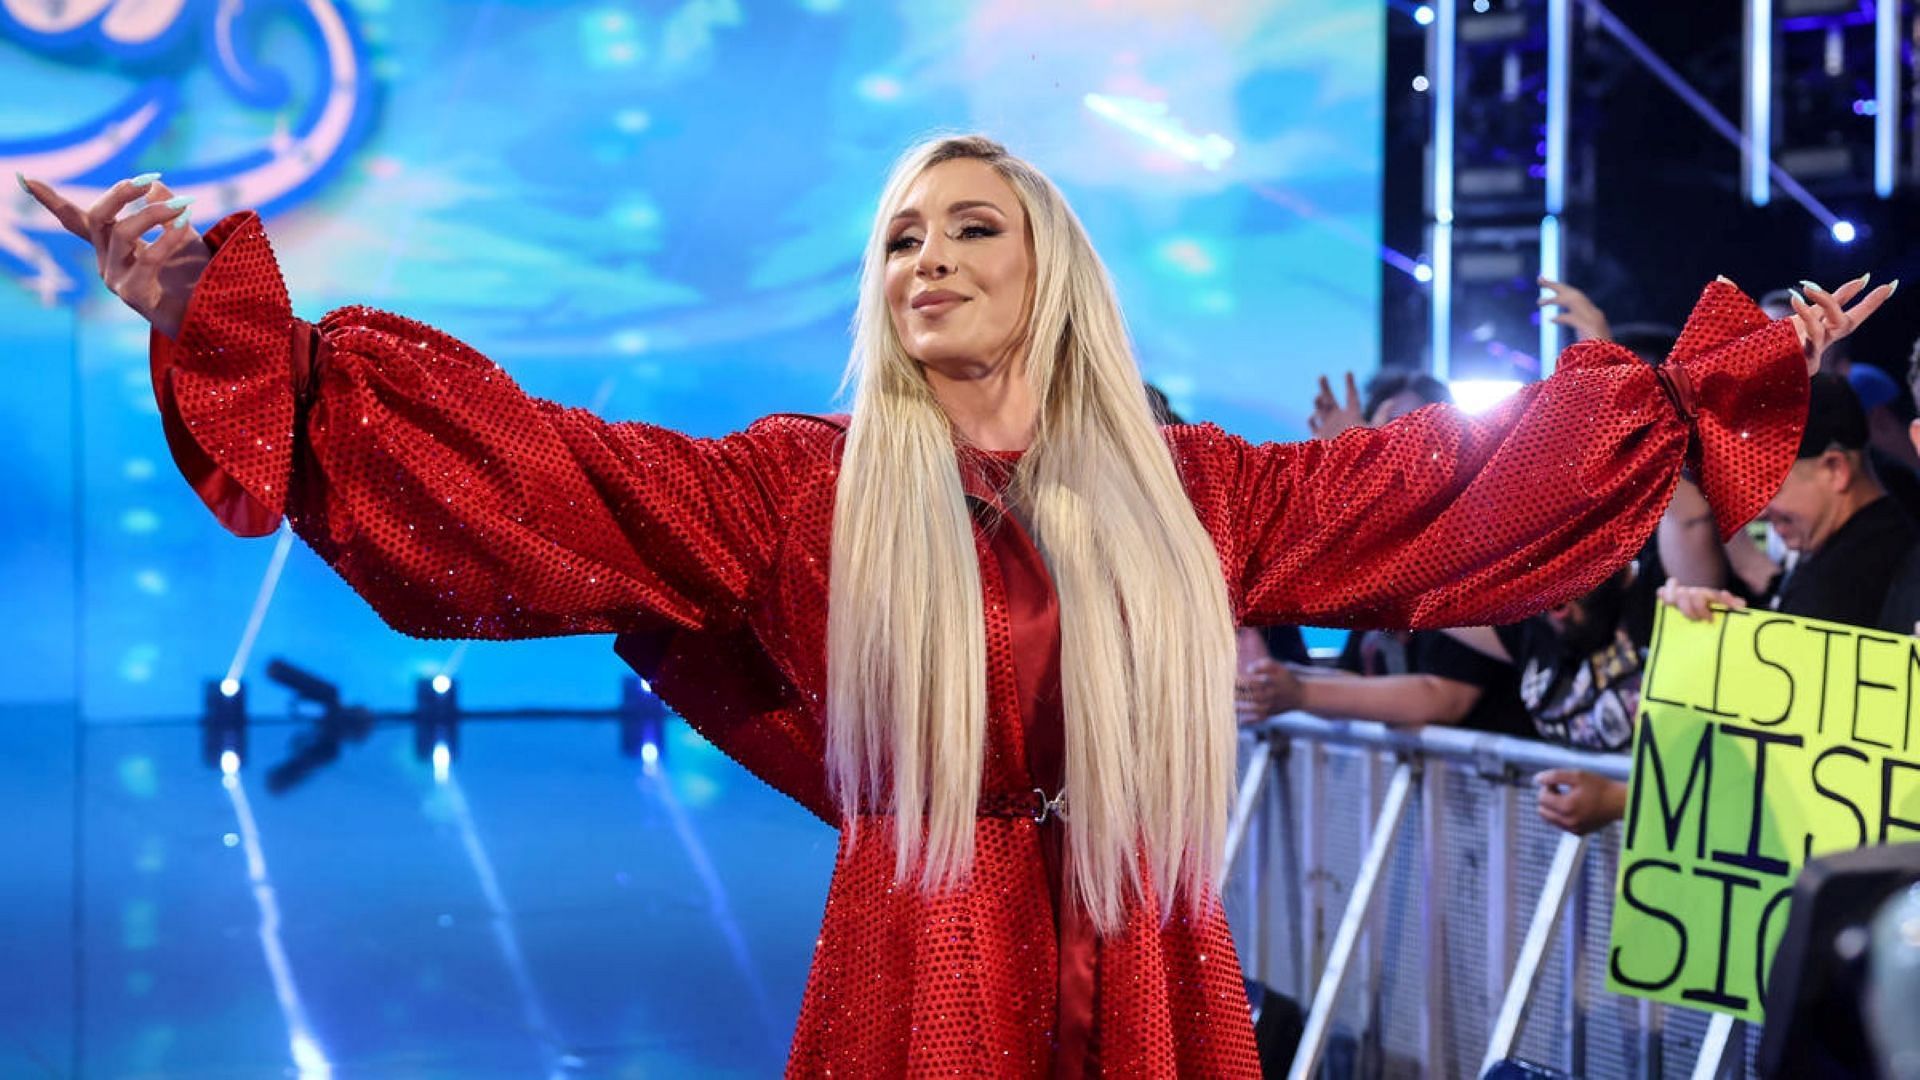 Charlotte Flair poses for fans on WWE SmackDown